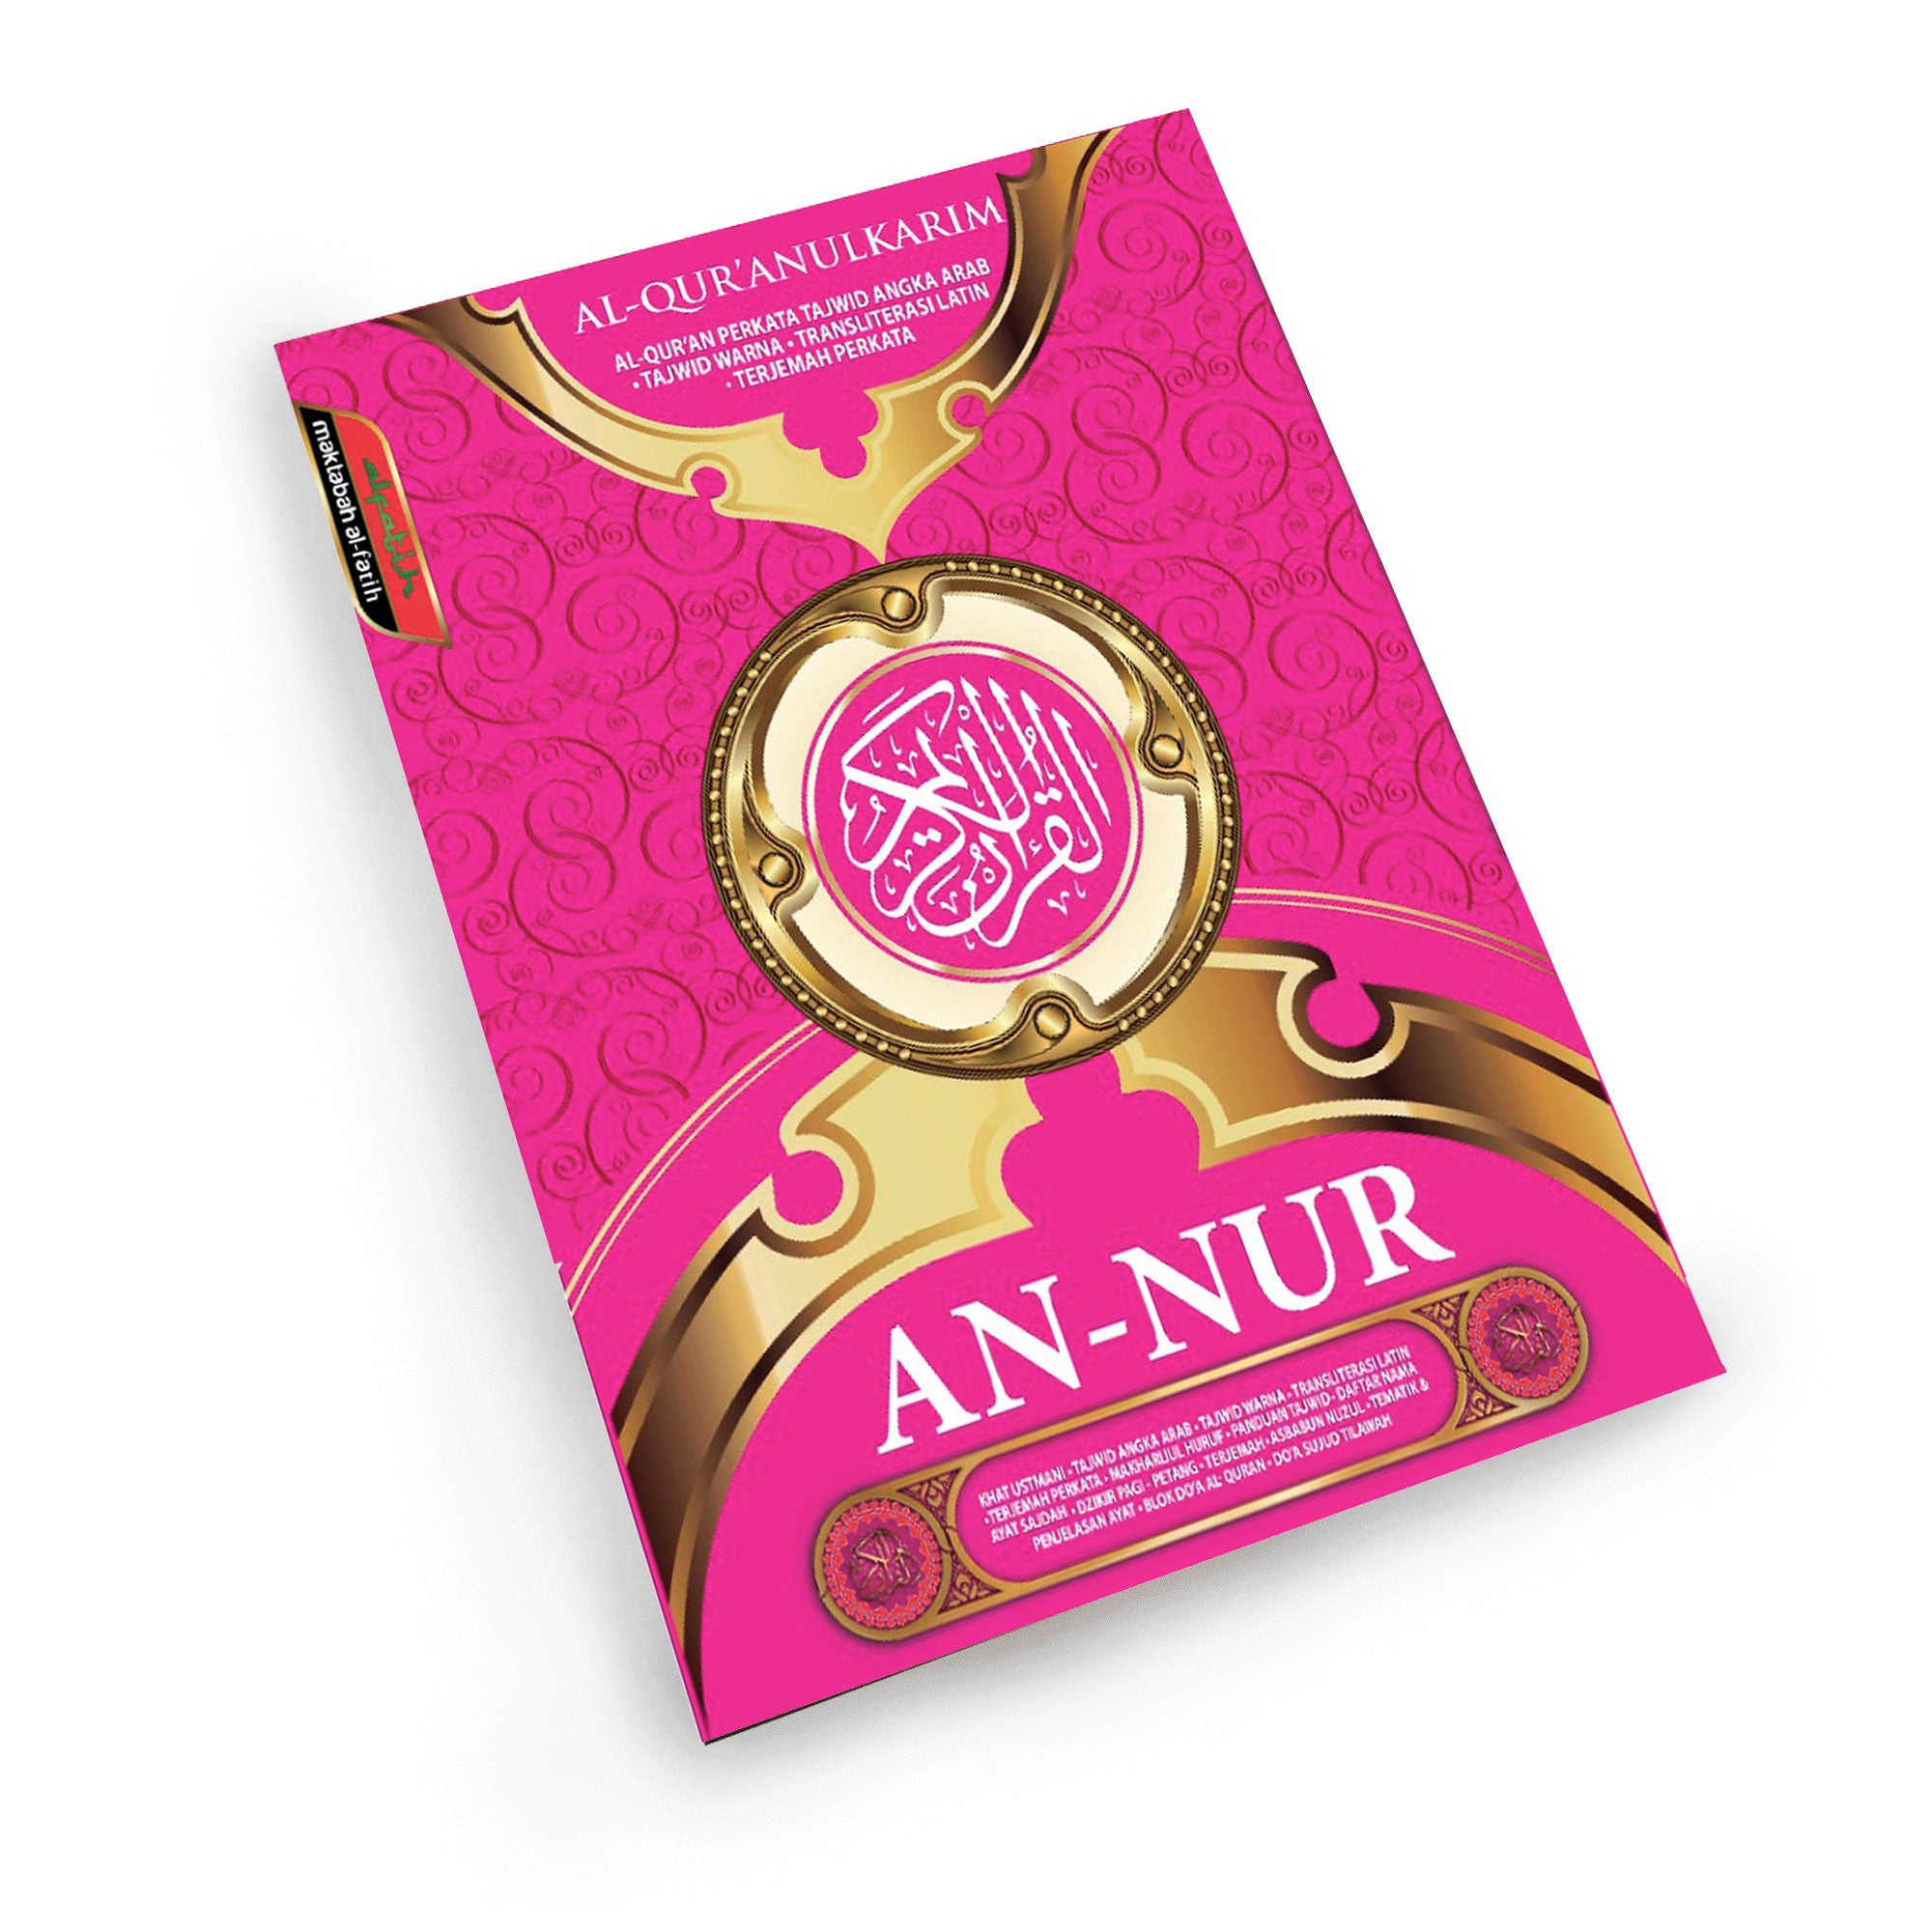 Al-Quran An-Nur (With Romanised Text) - A4 Size Pink